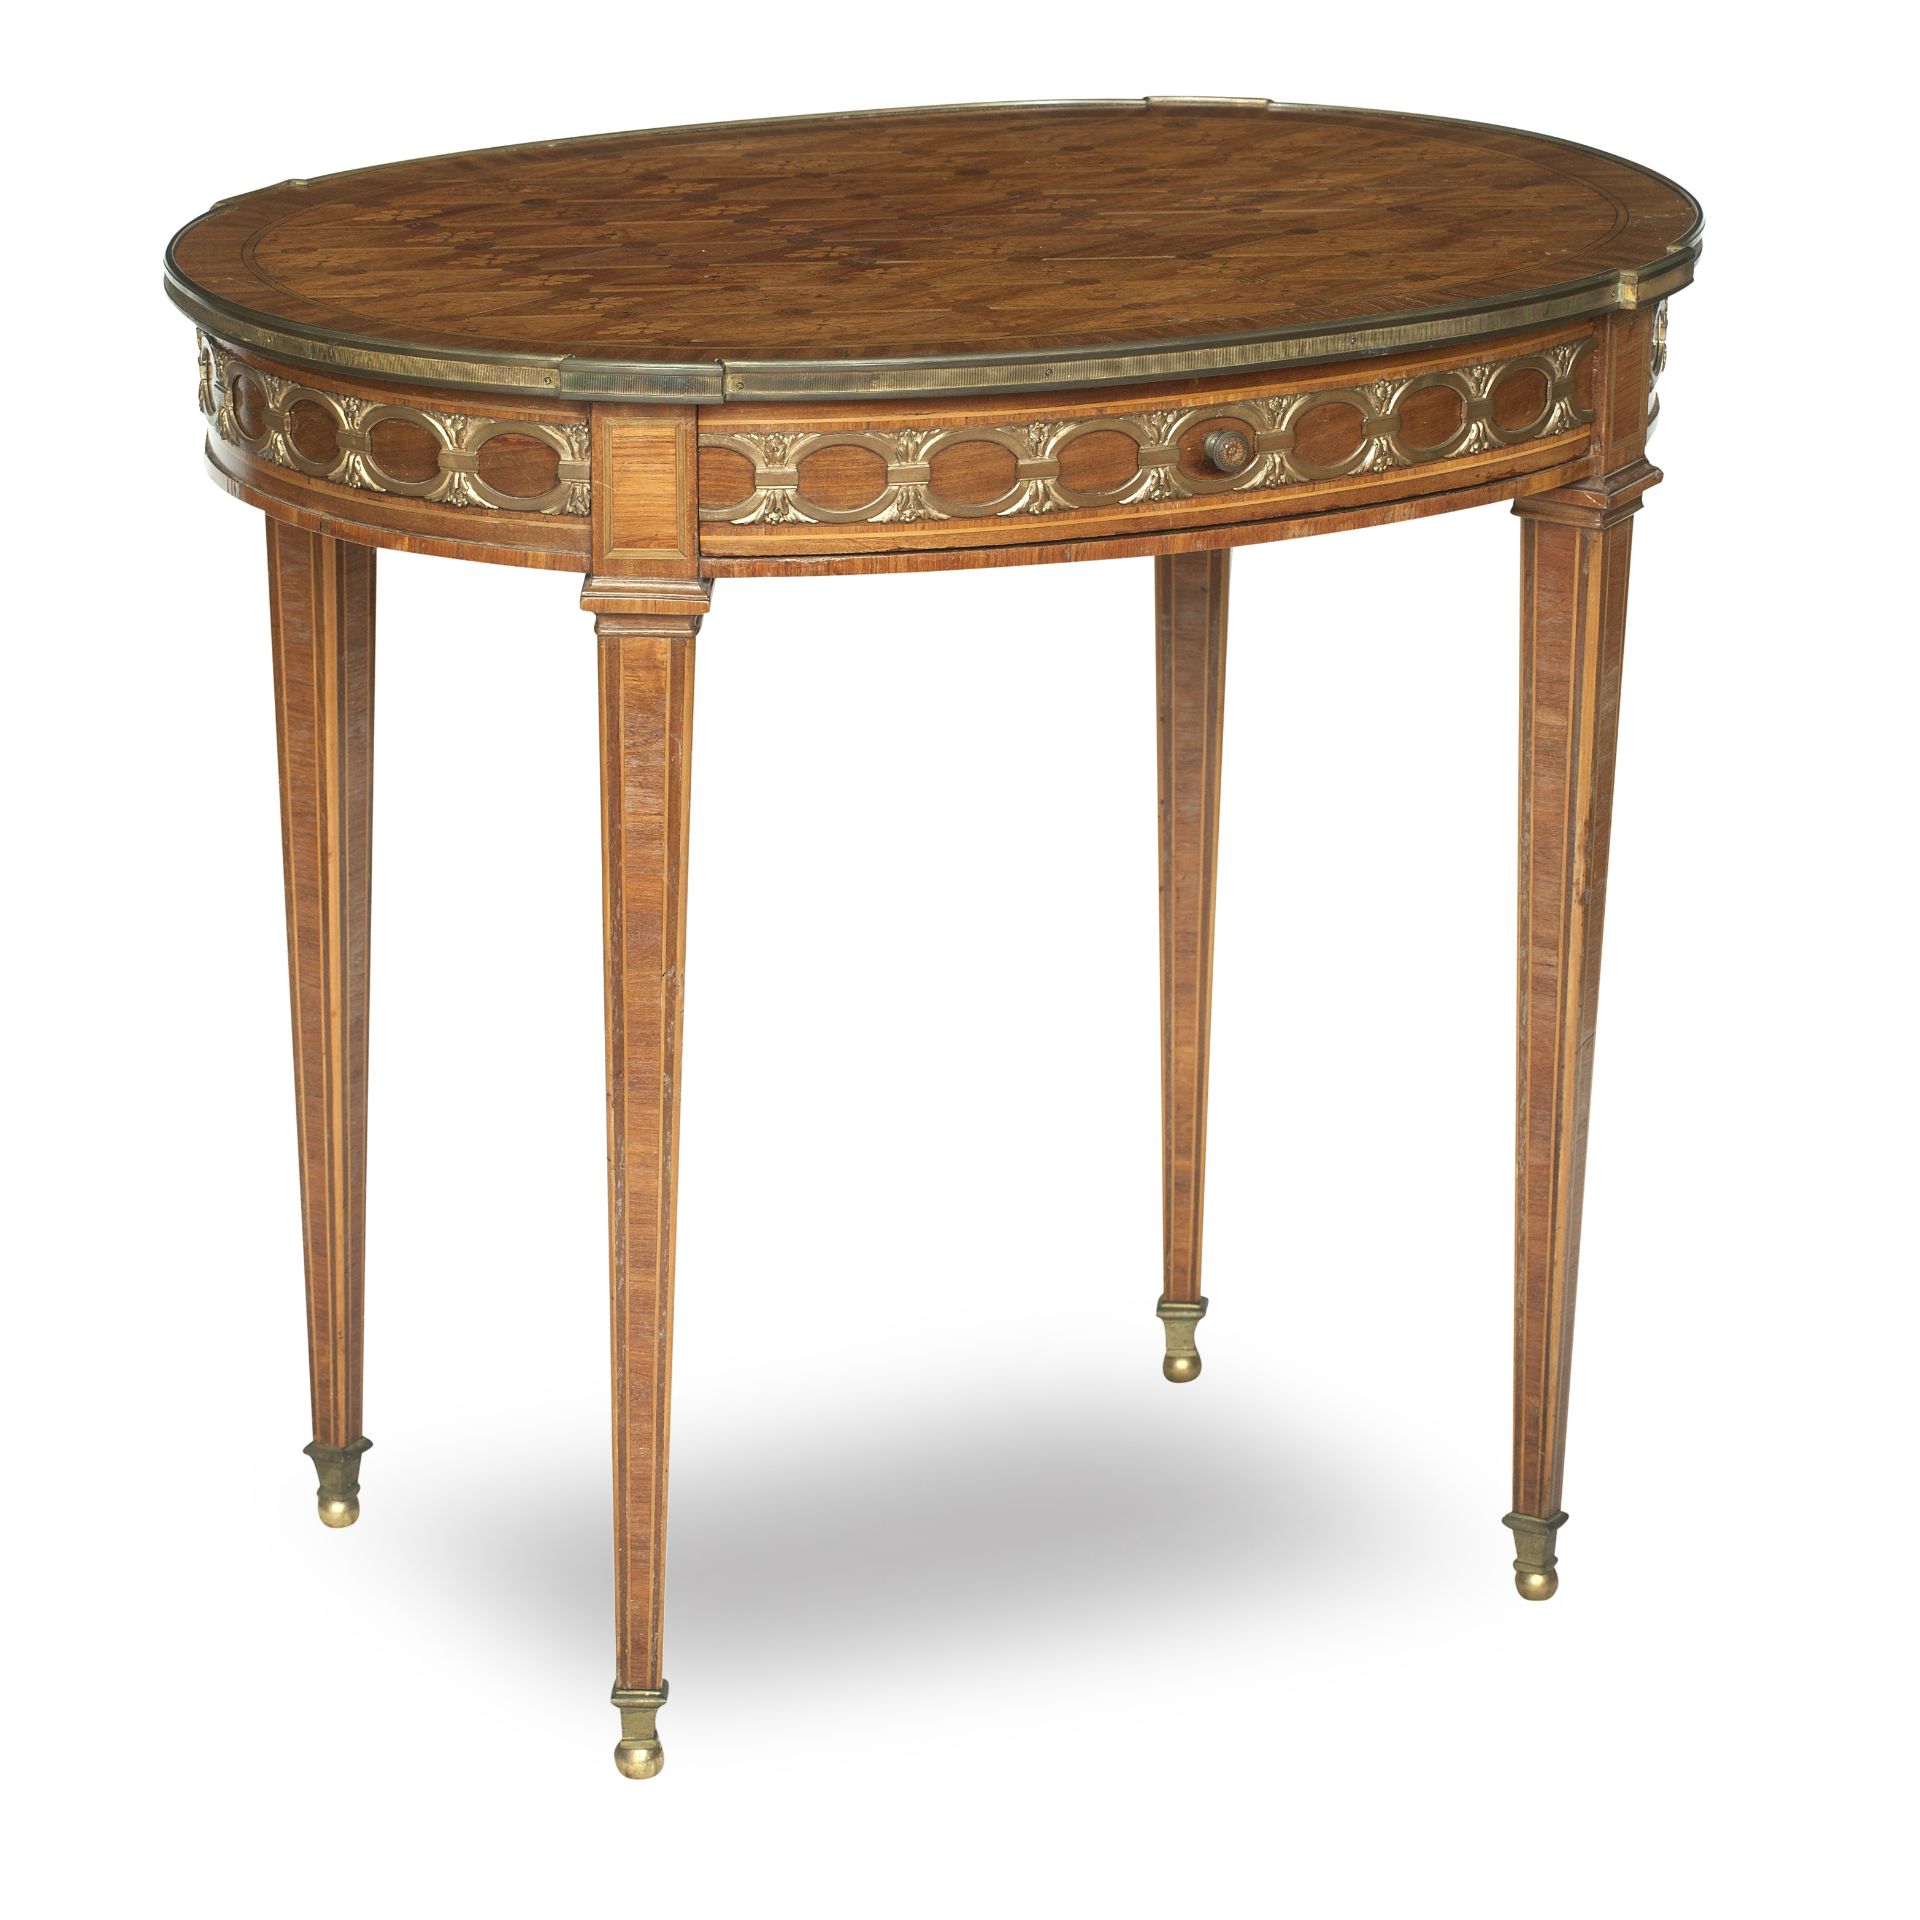 A Louis XVI style French walnut and parquetry inlaid gilt metal mounted occasional table, early 2...